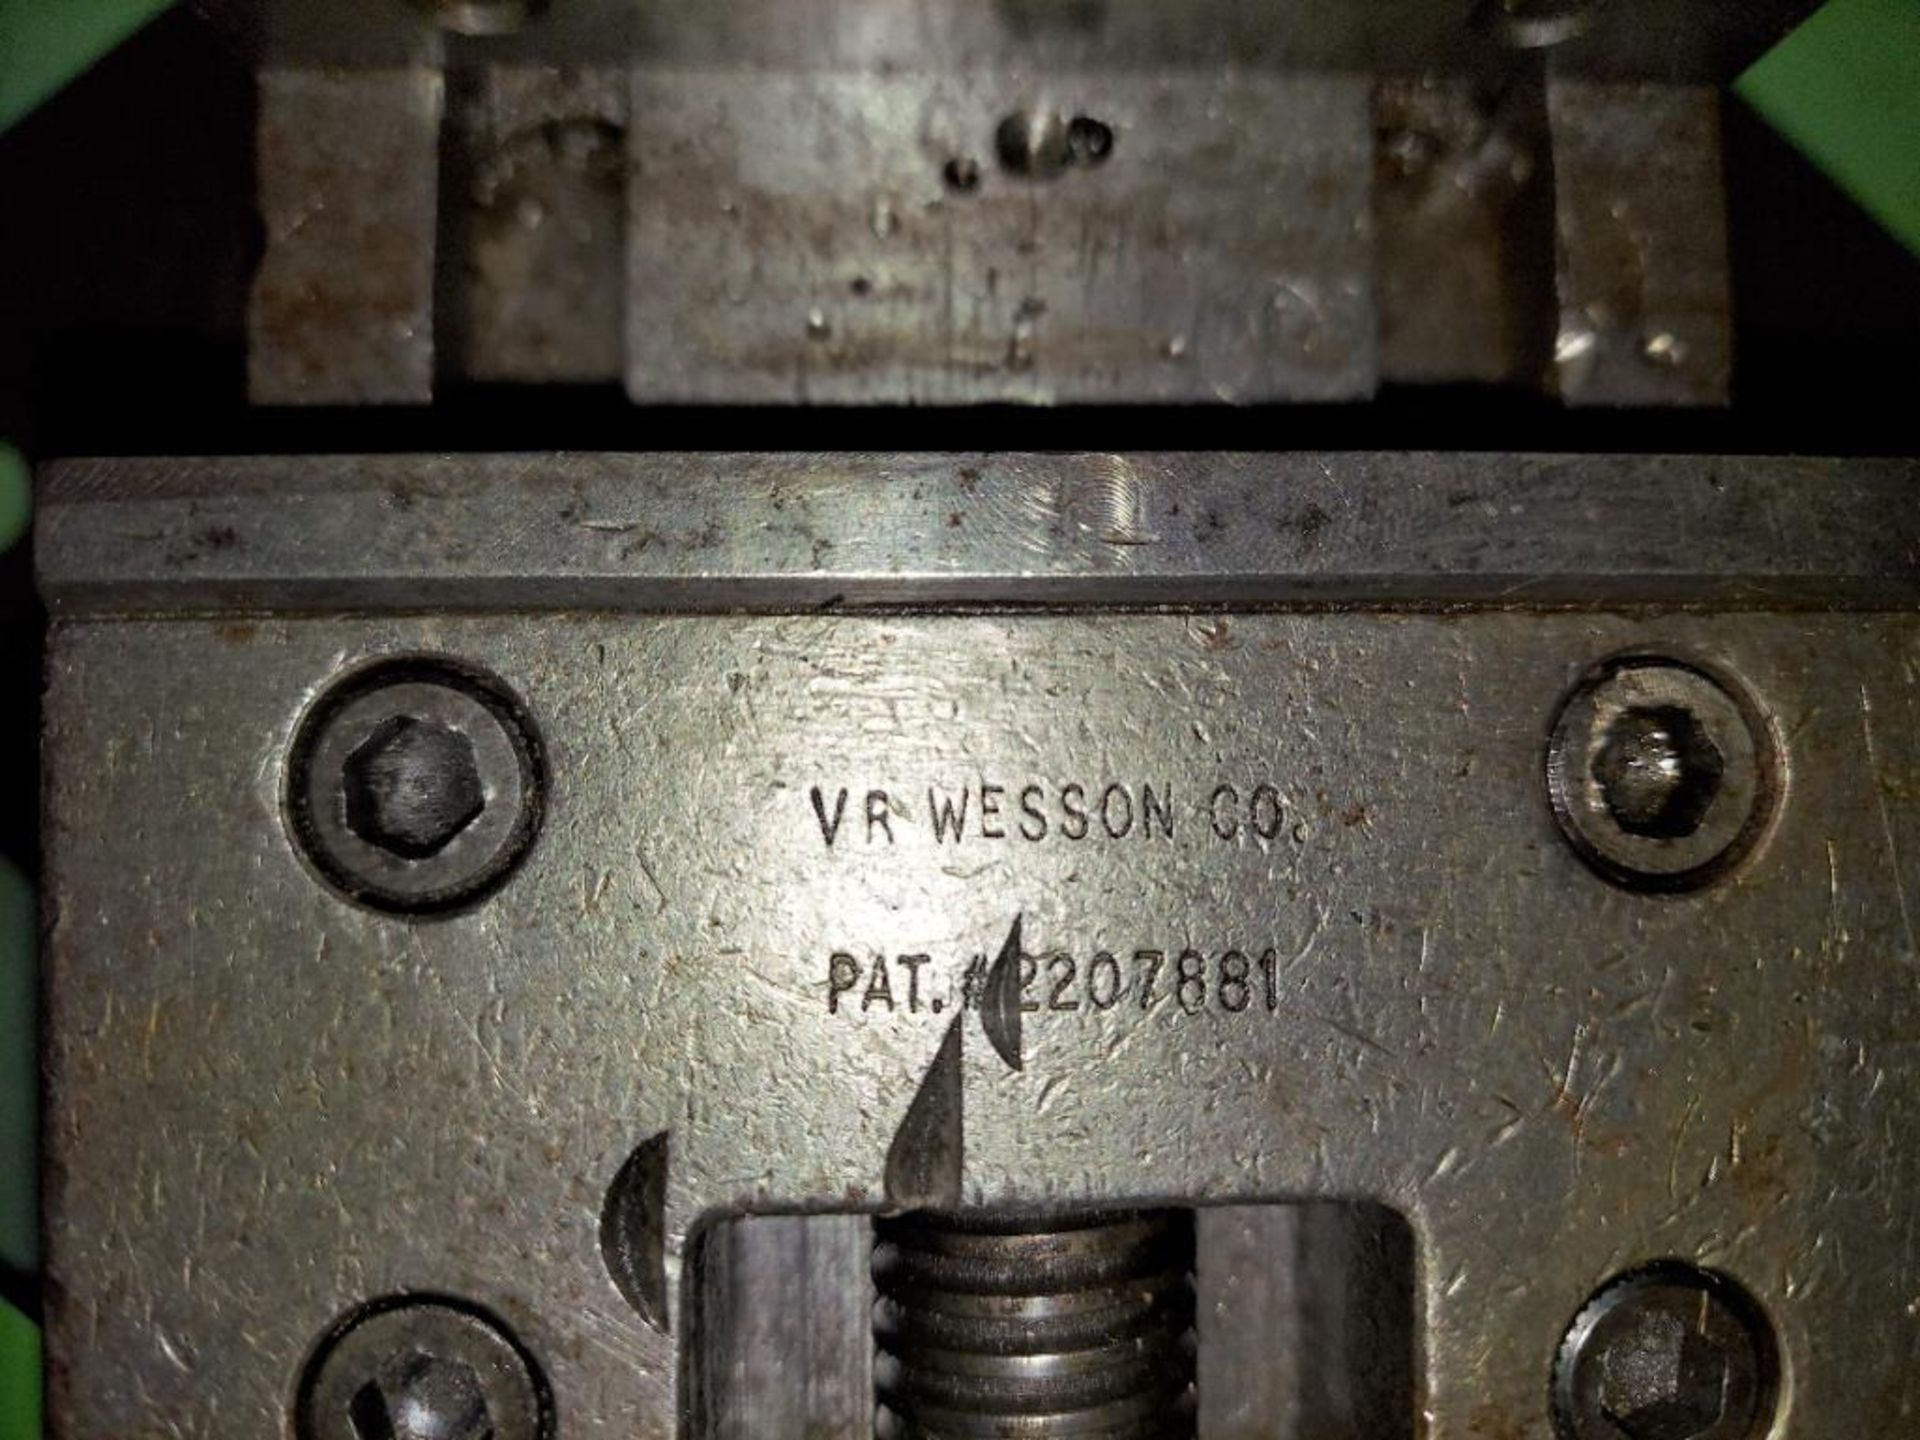 VR Wesson 4" Machine Vice - Image 3 of 3